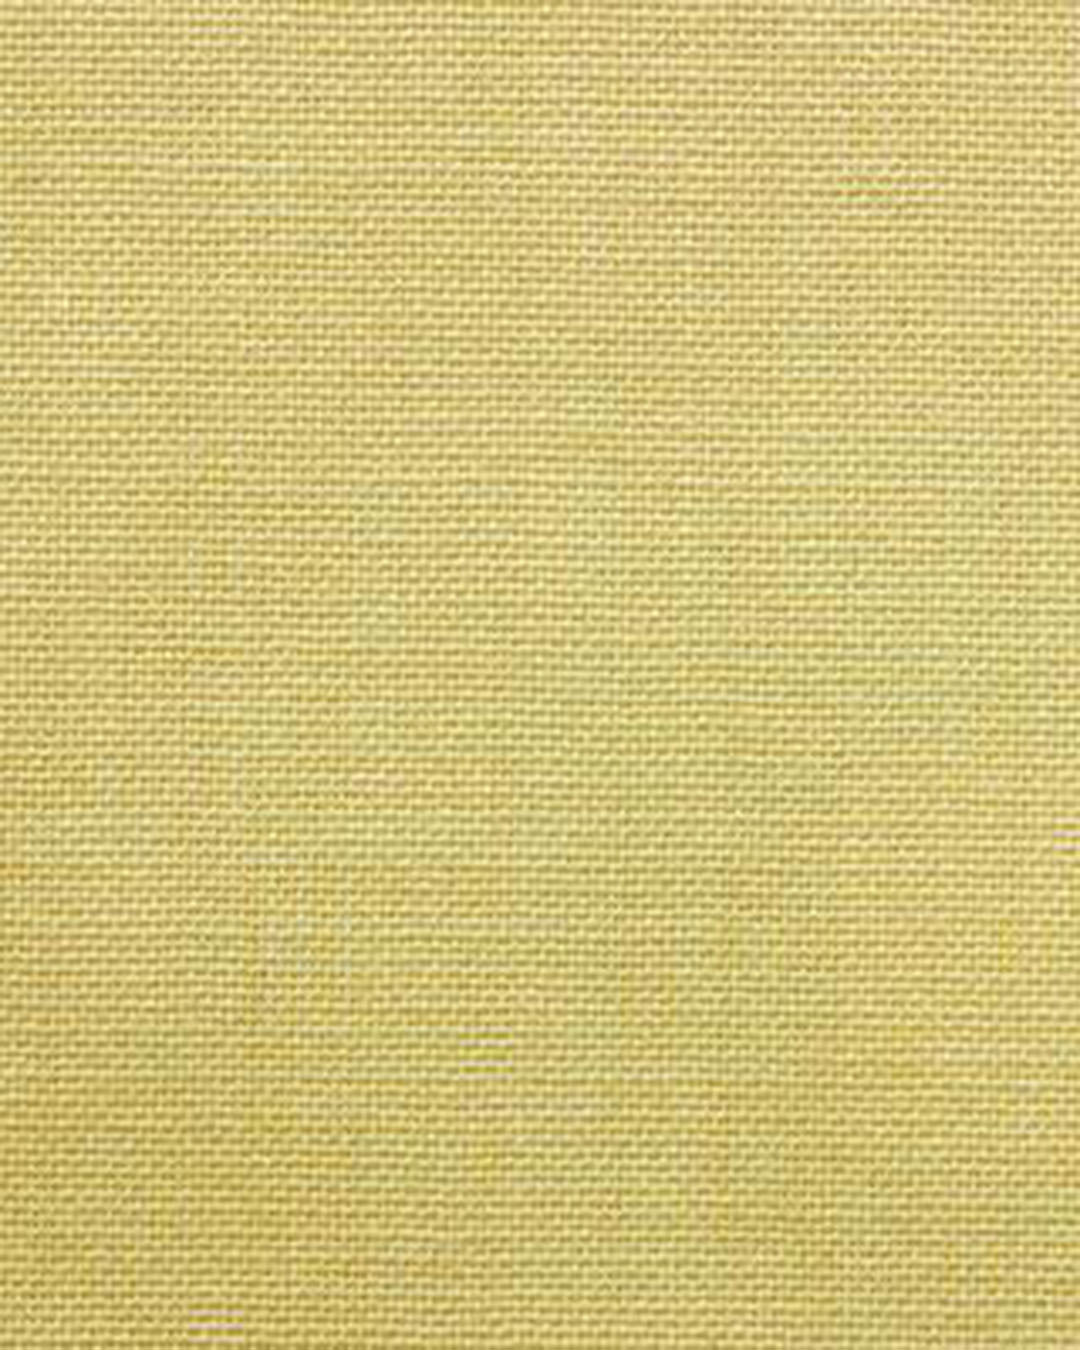 Dugdale Fine Worsted - Yellow